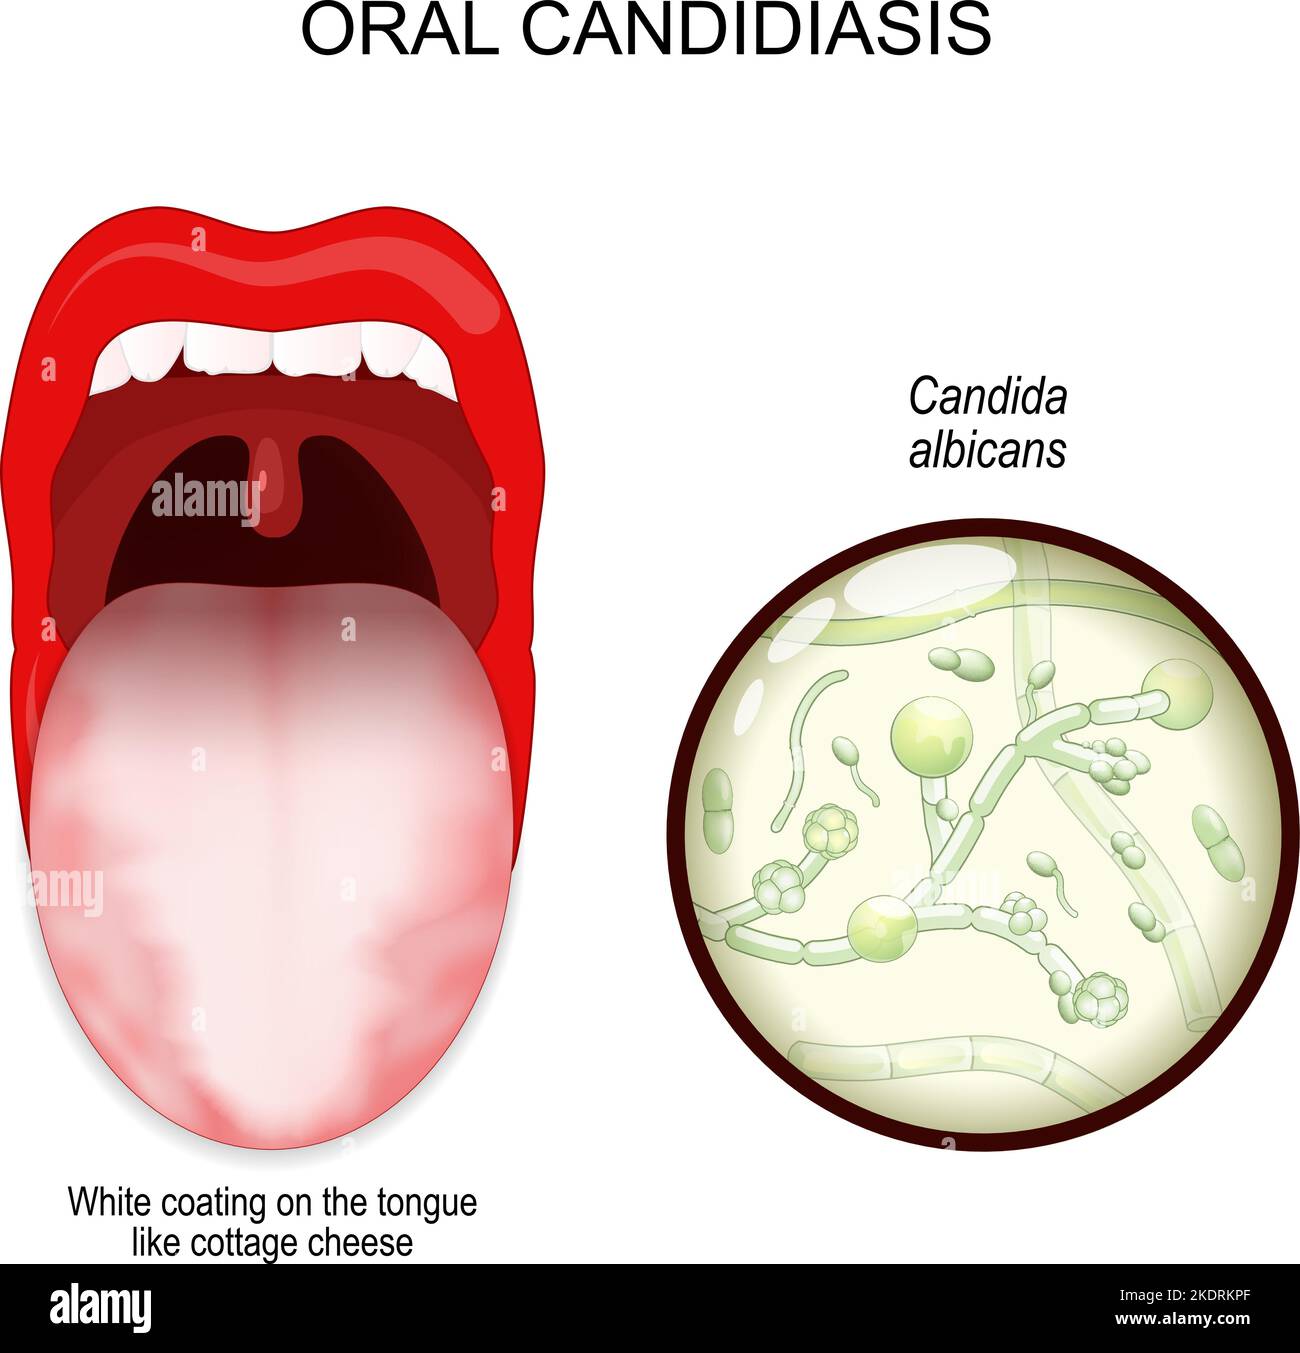 oral candidiasis. oral thrush yeast infection. White coating on the tongue like cottage cheese. Close-up of a fungi Candida albicans. Vector Stock Vector